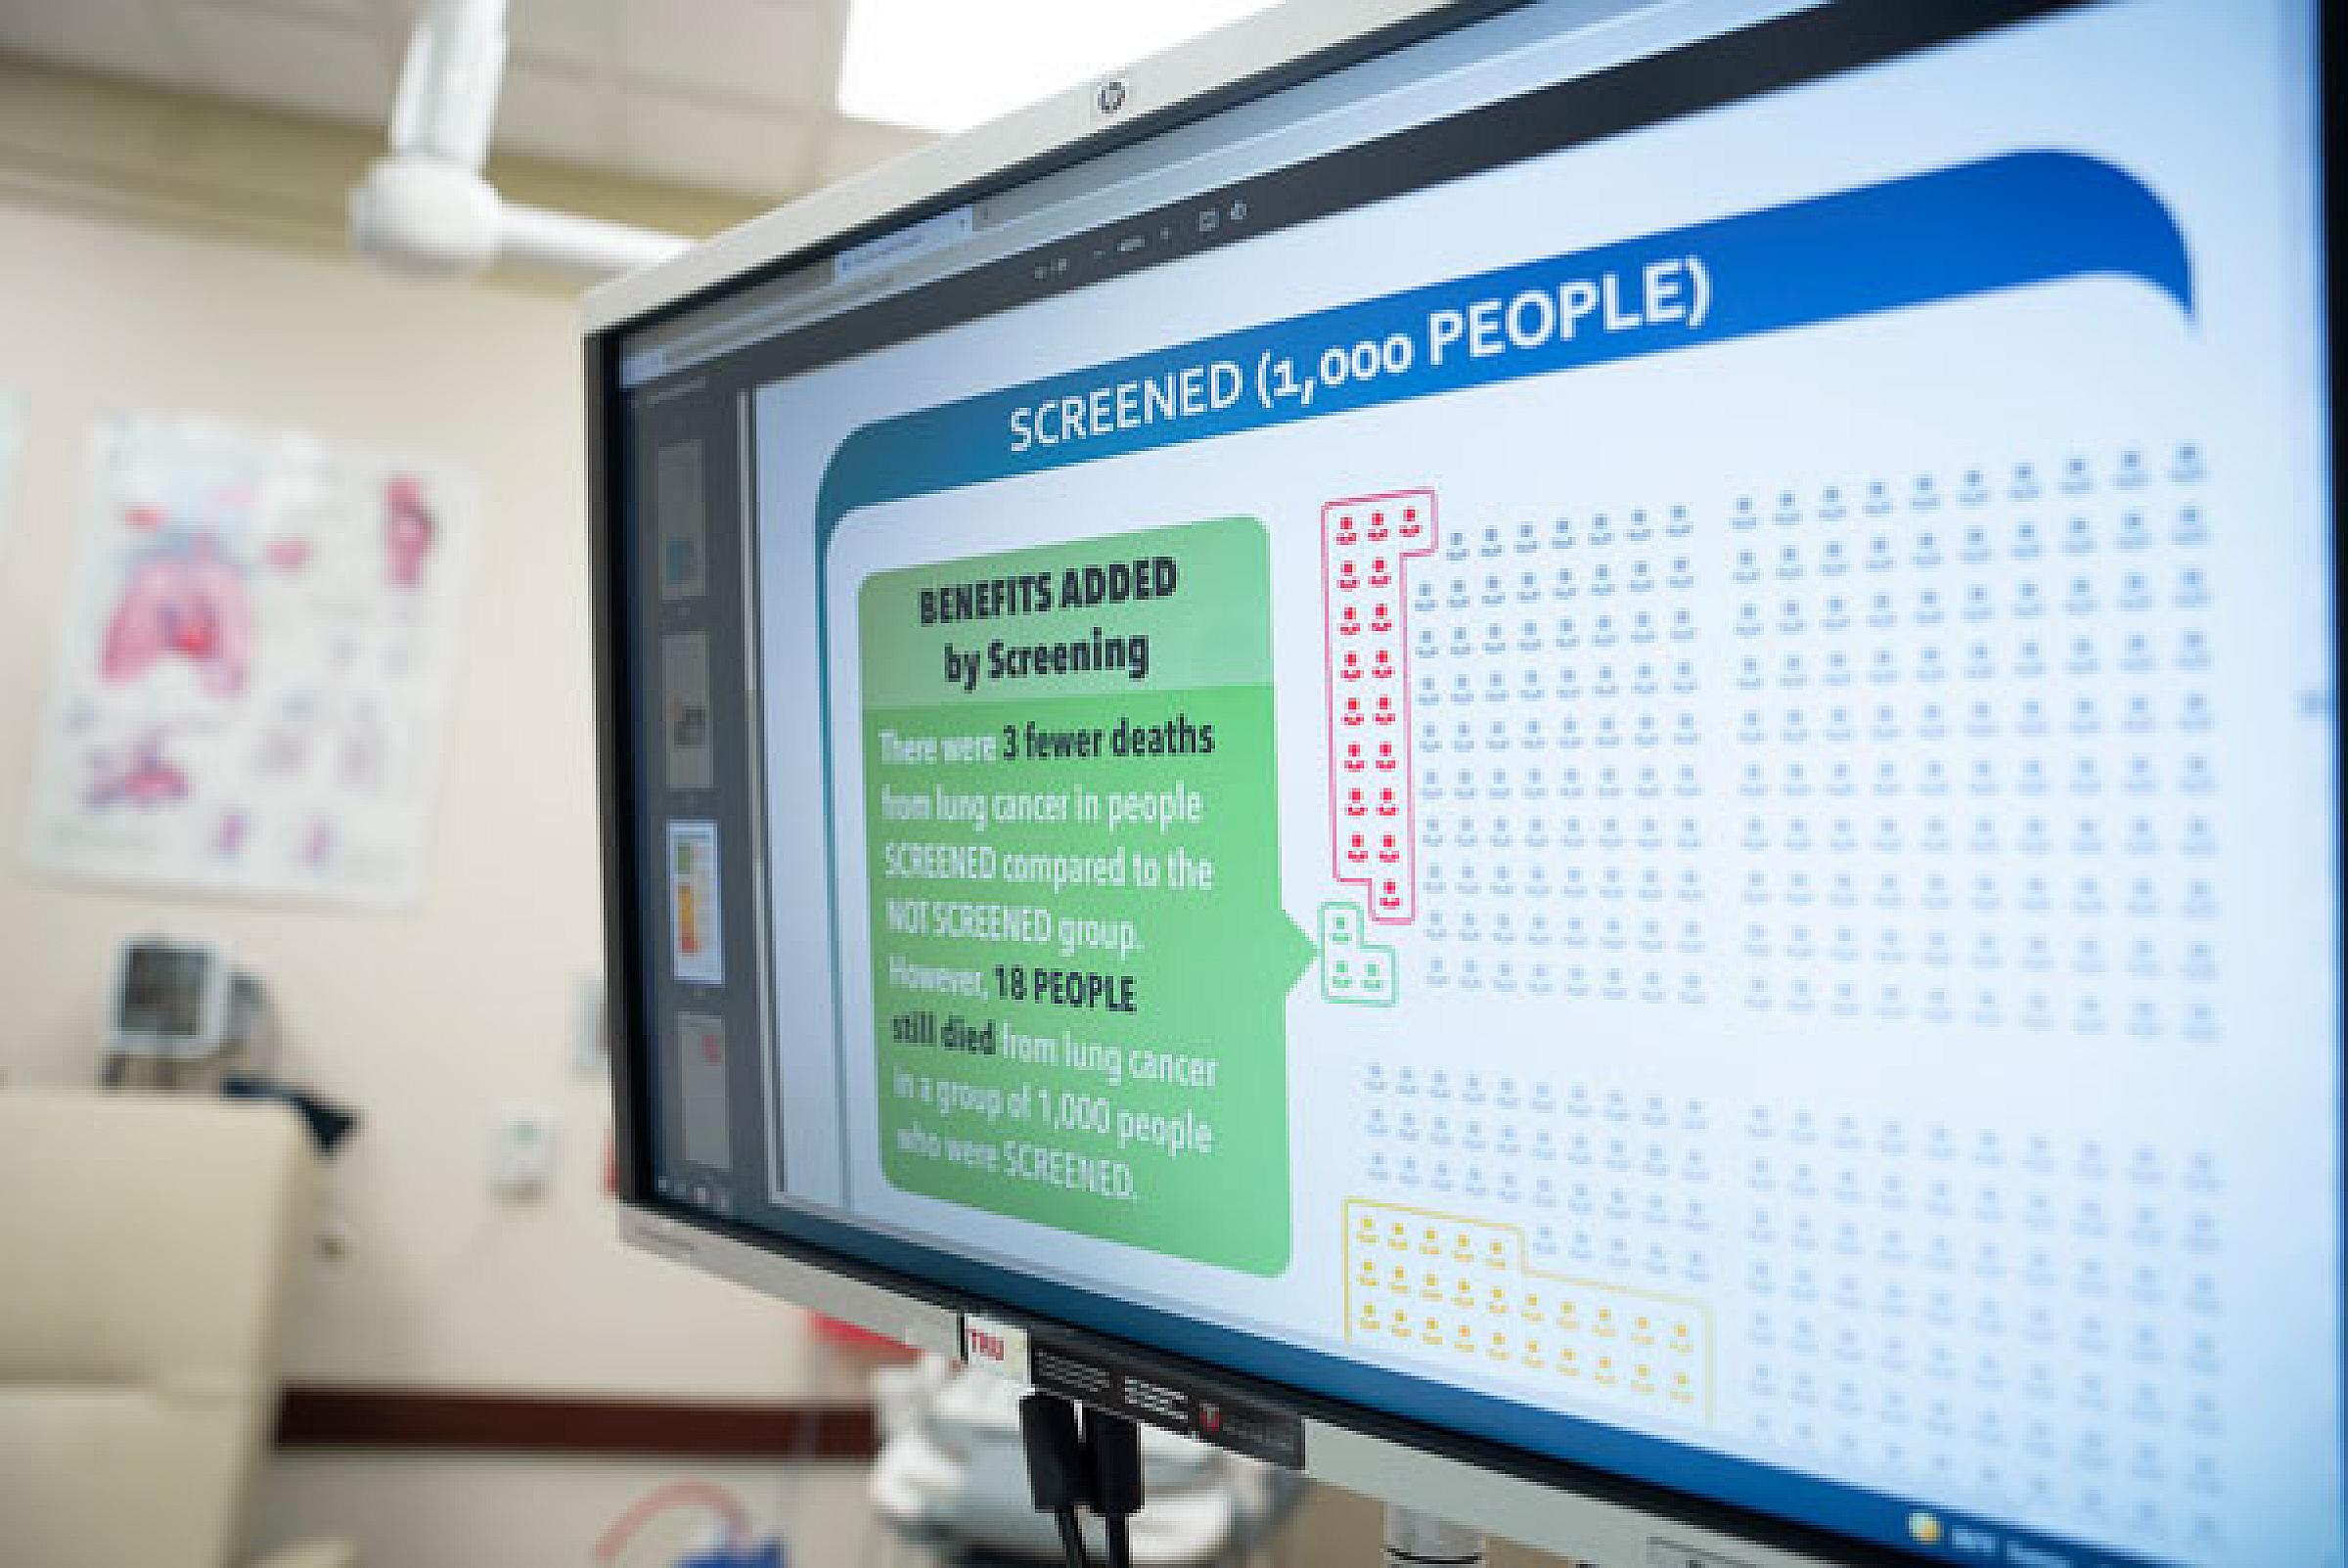 Computer screen showing graphic of benefits of added screening